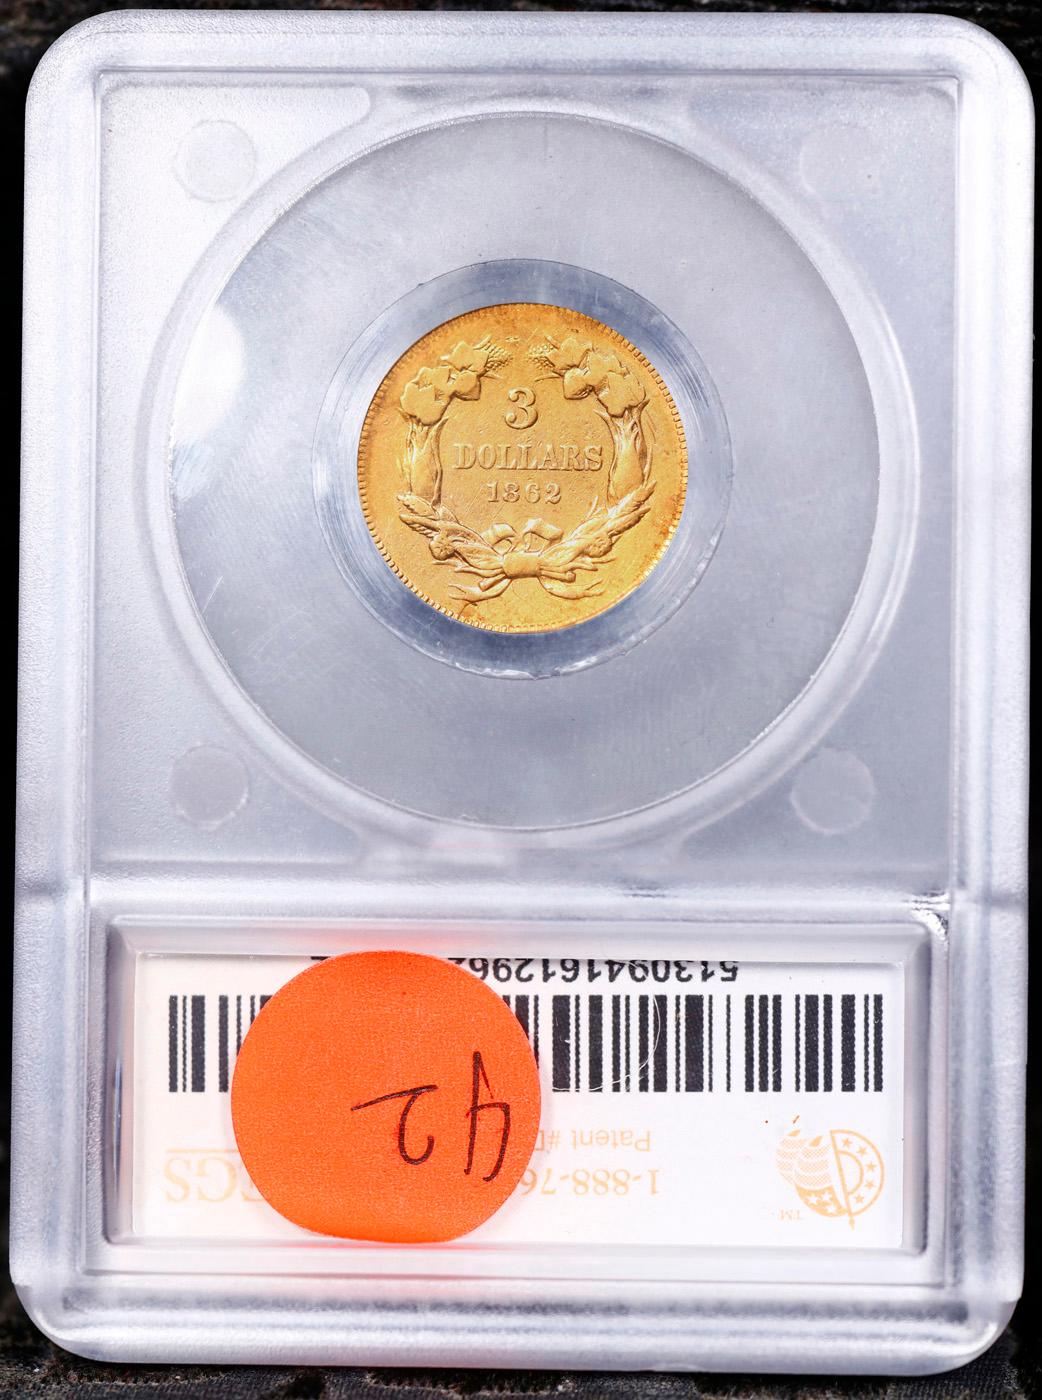 ***Auction Highlight*** 1862 Three Dollar Gold 3 Graded xf45 details By SEGS (fc)